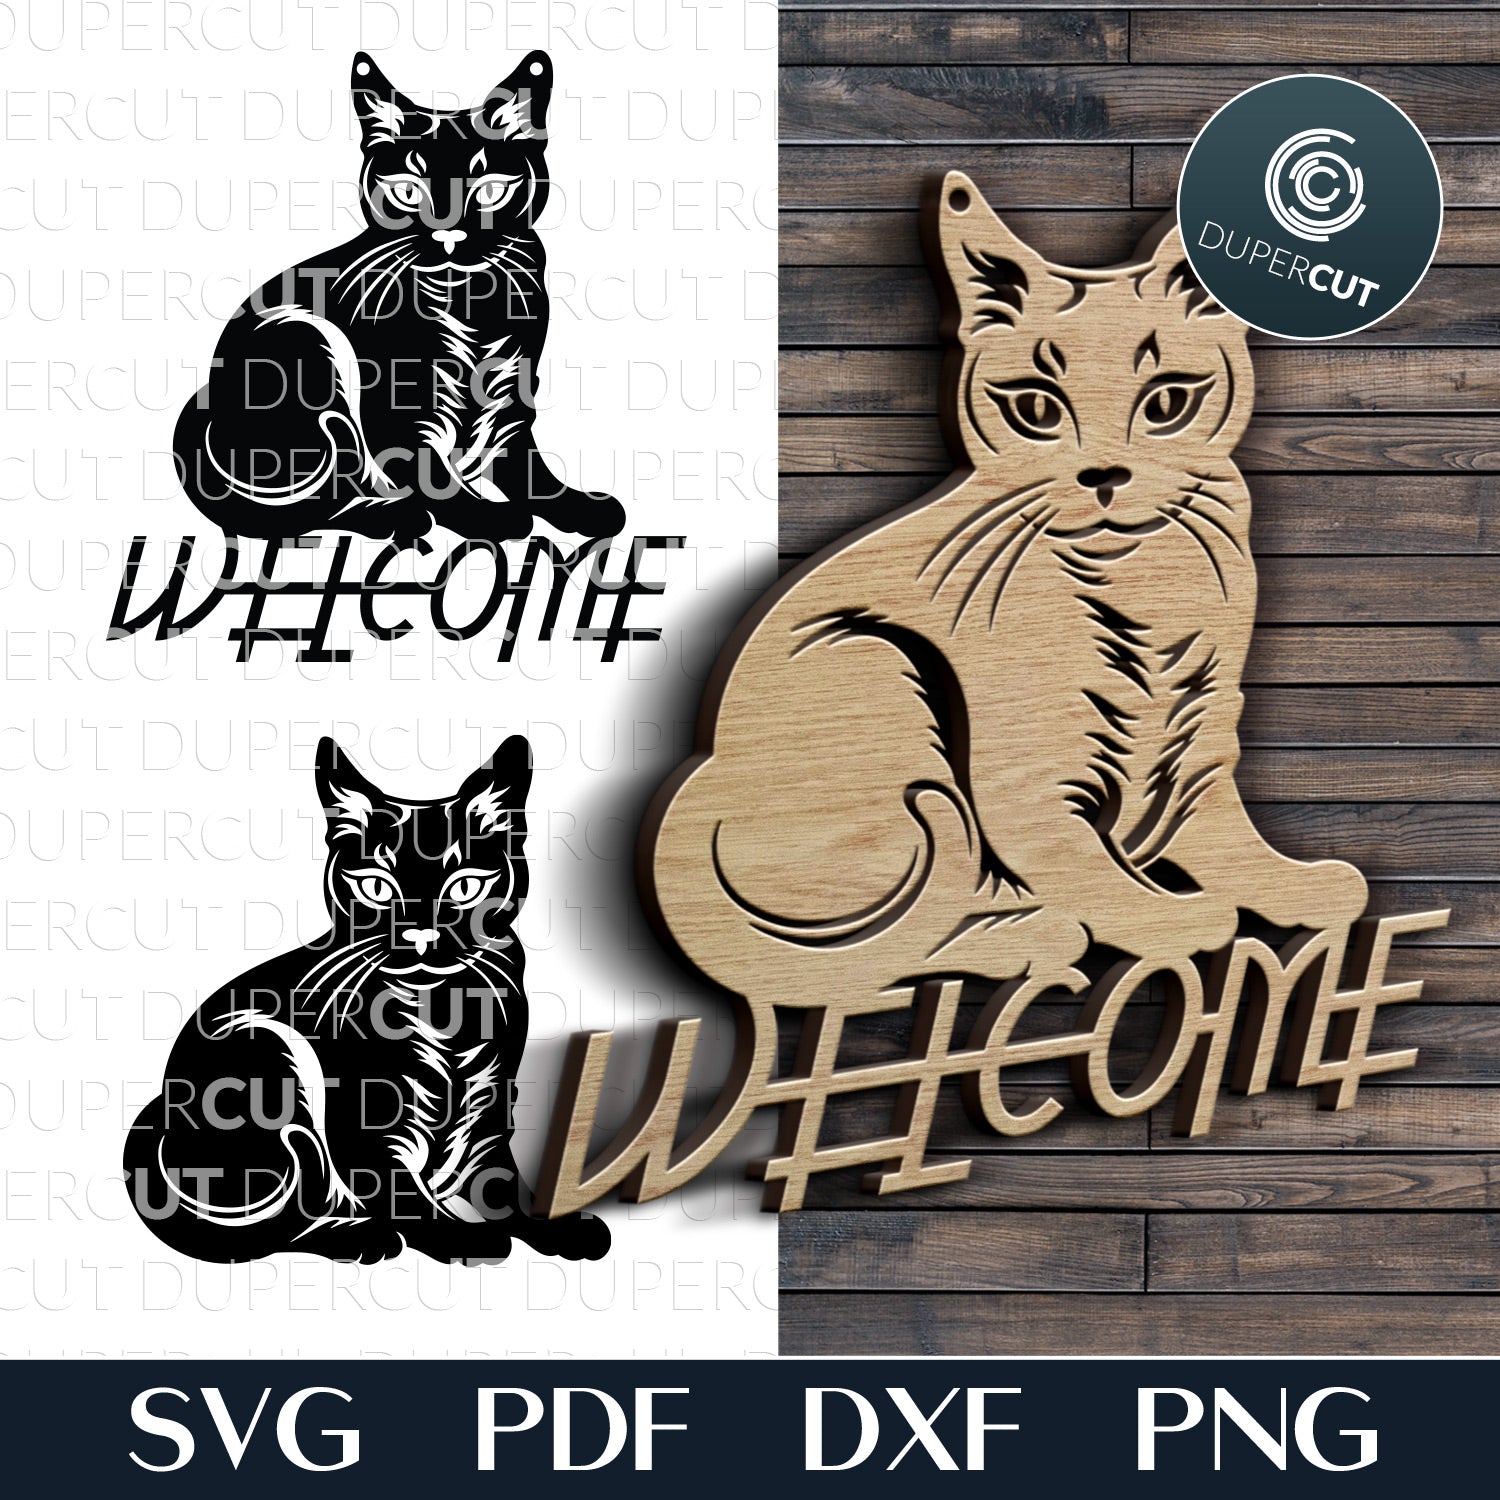 Cat welcome sign door hanger - SVG DXF vector files for Glowforge, Cricut, Silhouette cameo, CNC plasma machines by www.DuperCut.com